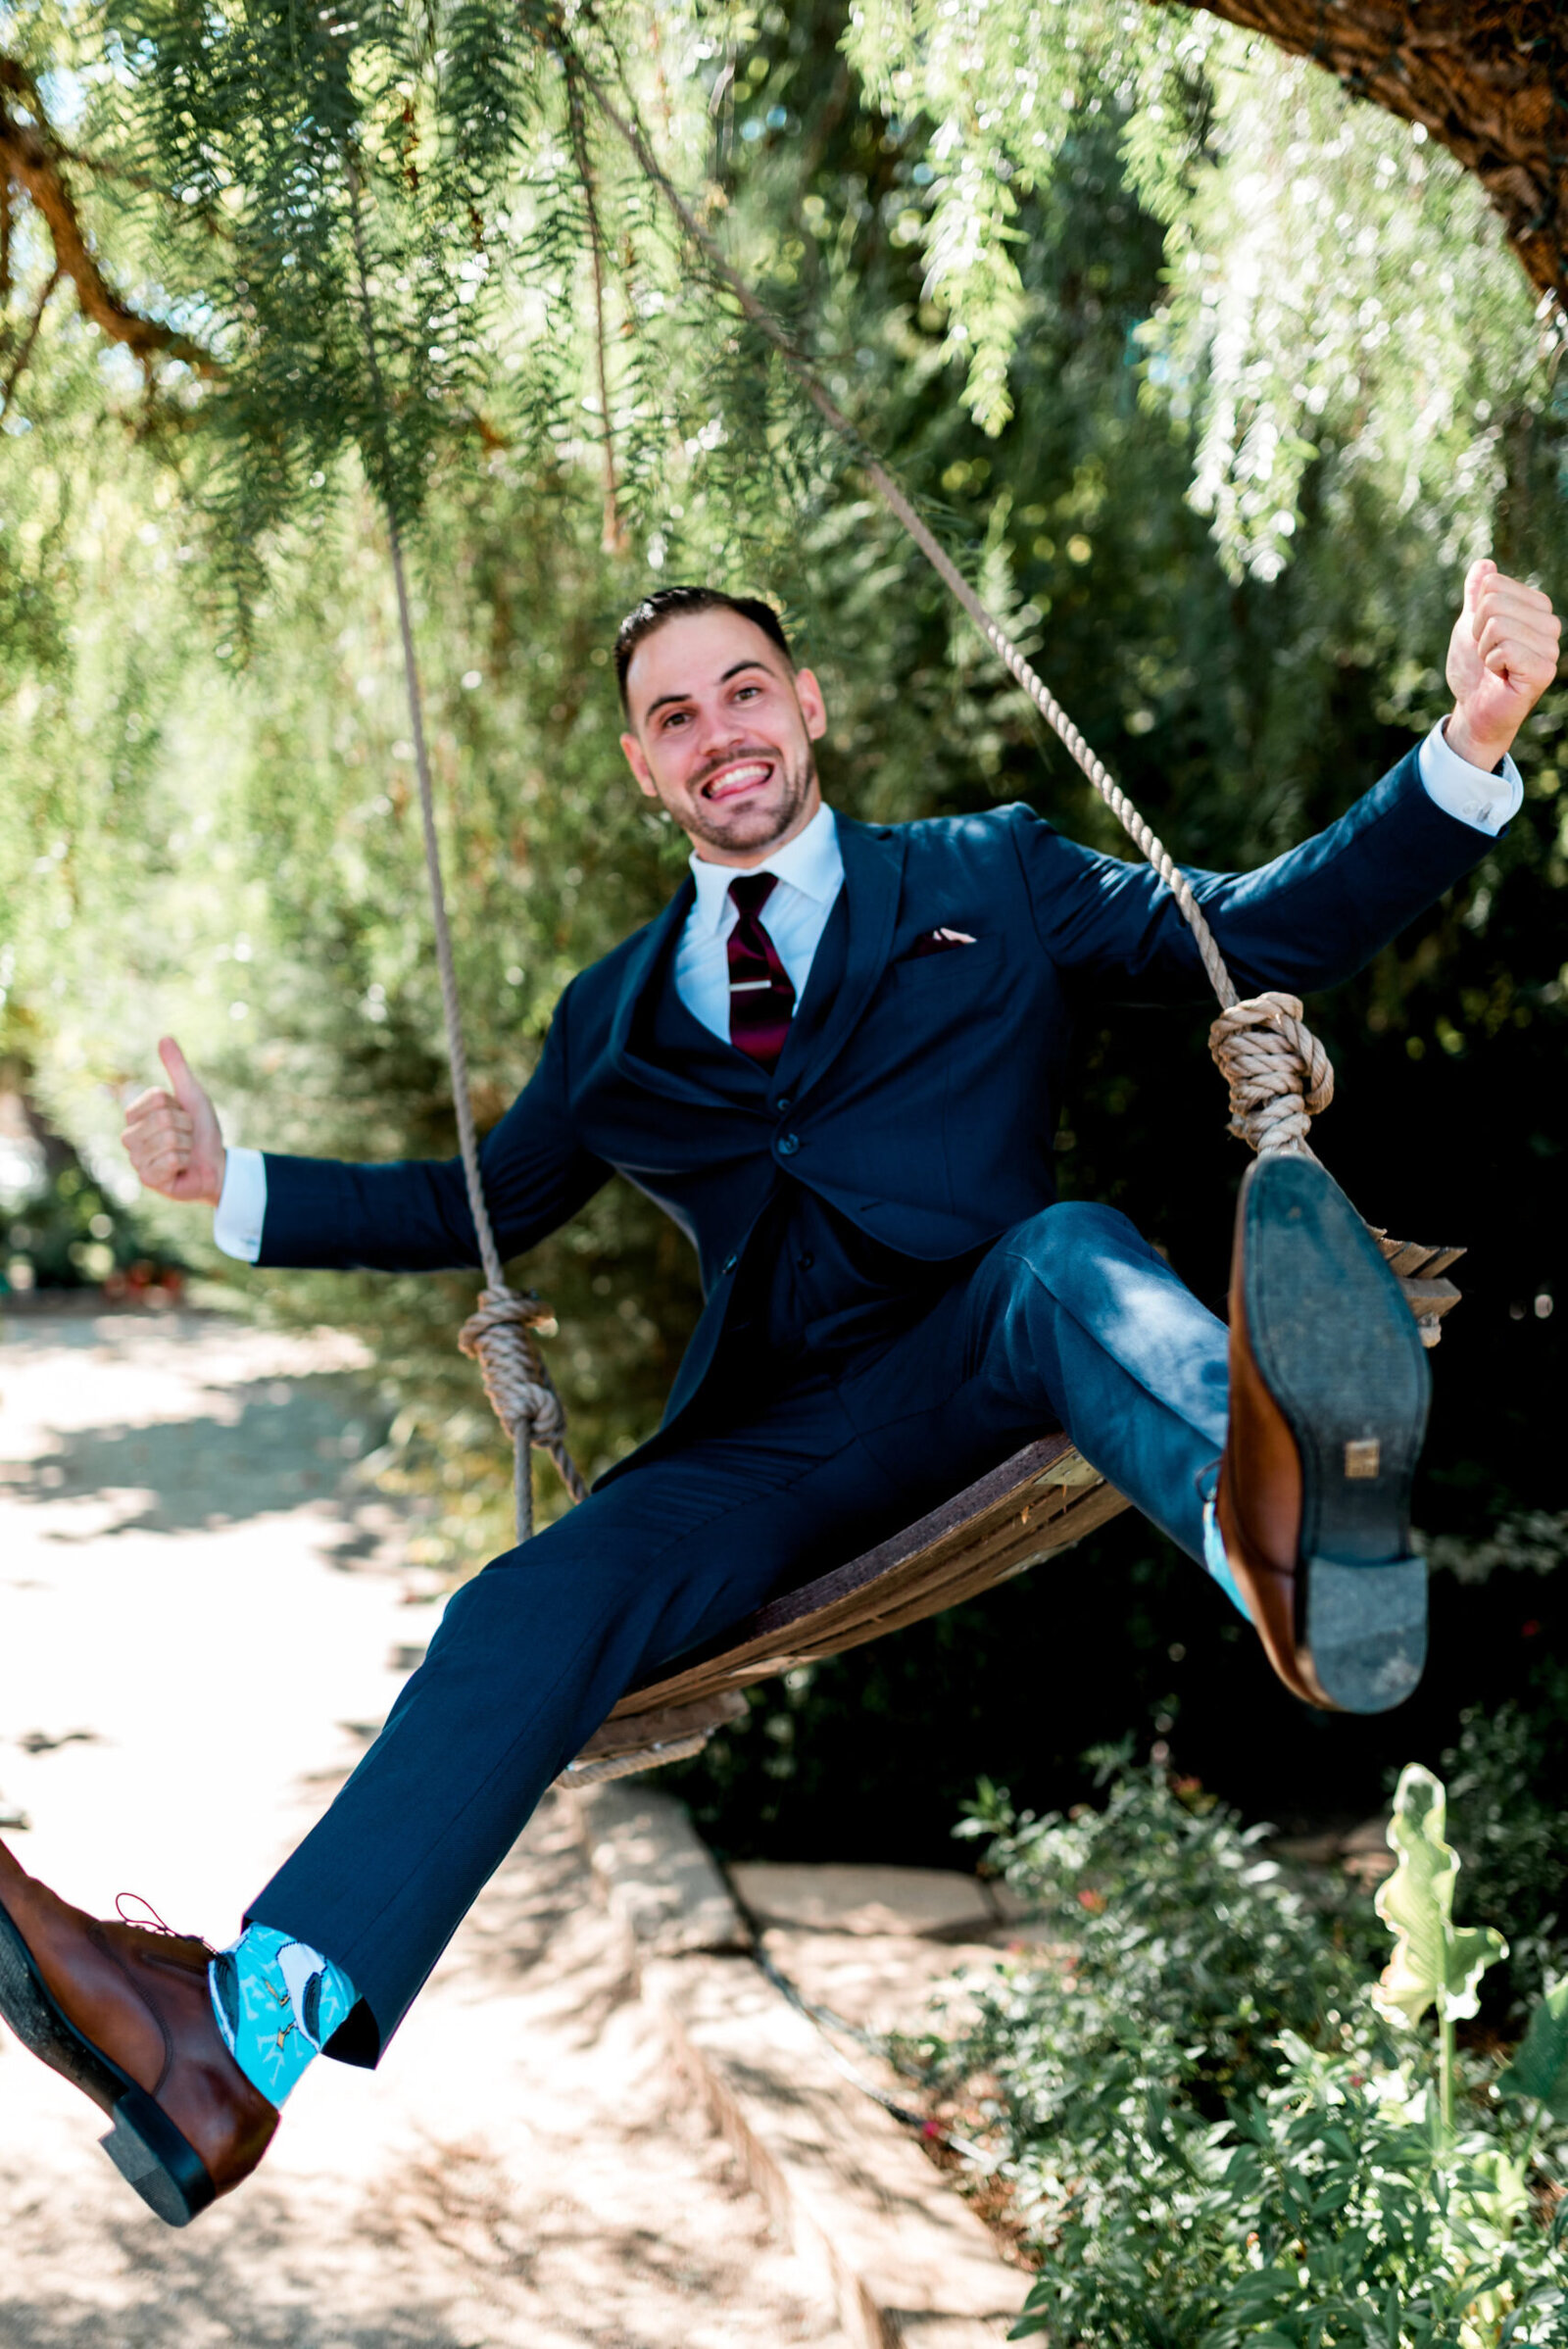 Groom on a swing, looking very excited with a big smile on his face, giving two thumbs up.